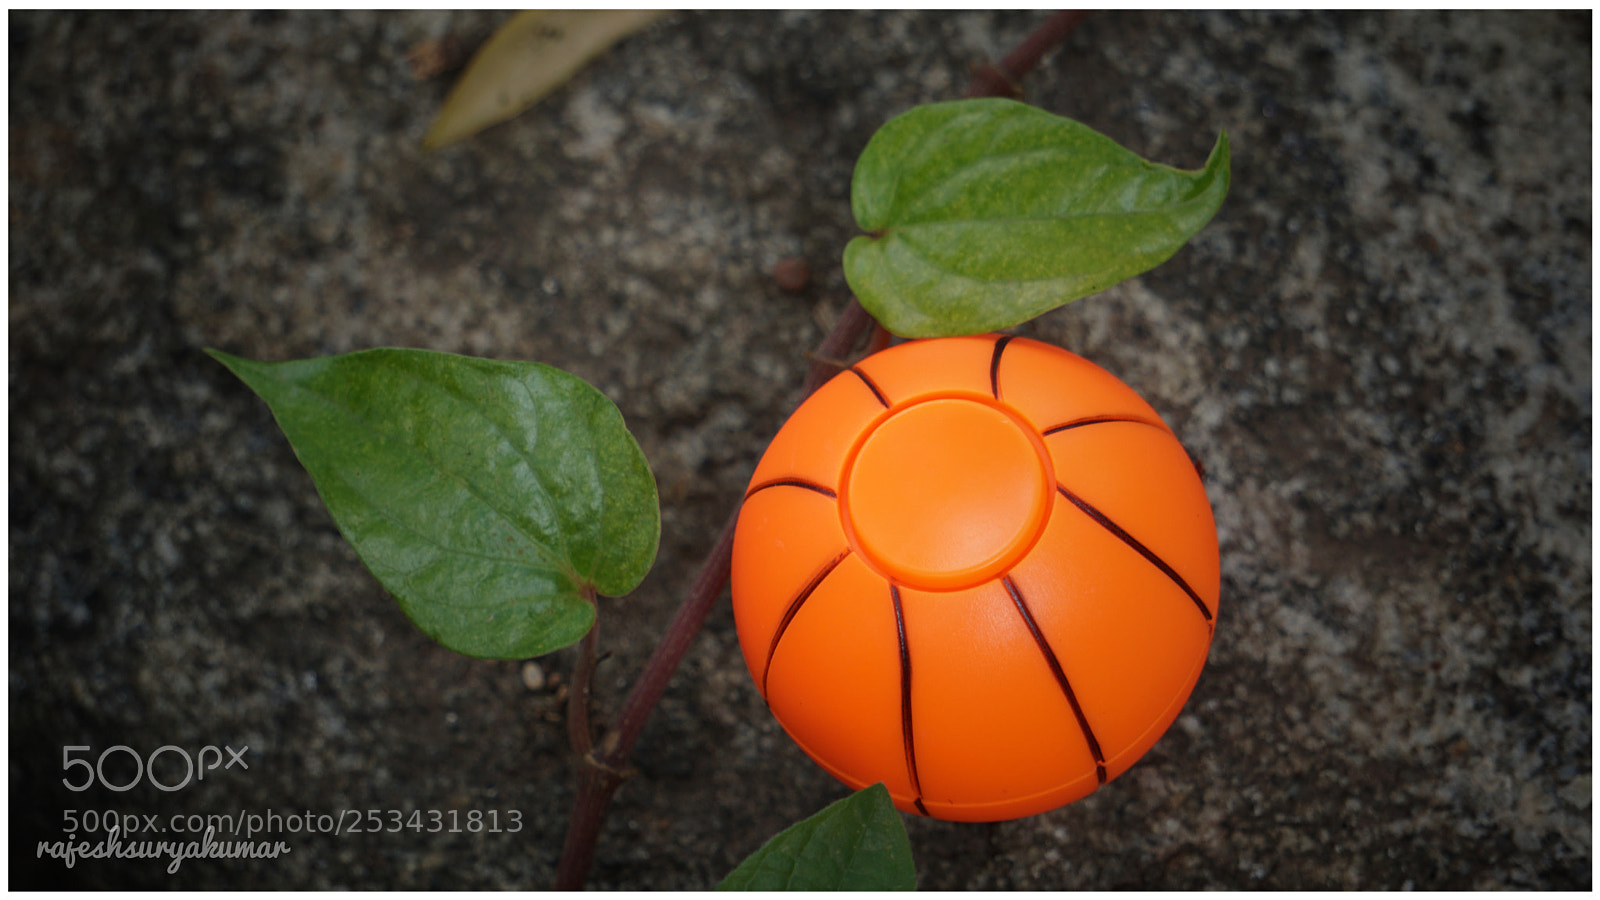 Sony a6300 sample photo. Ball & leaves photography